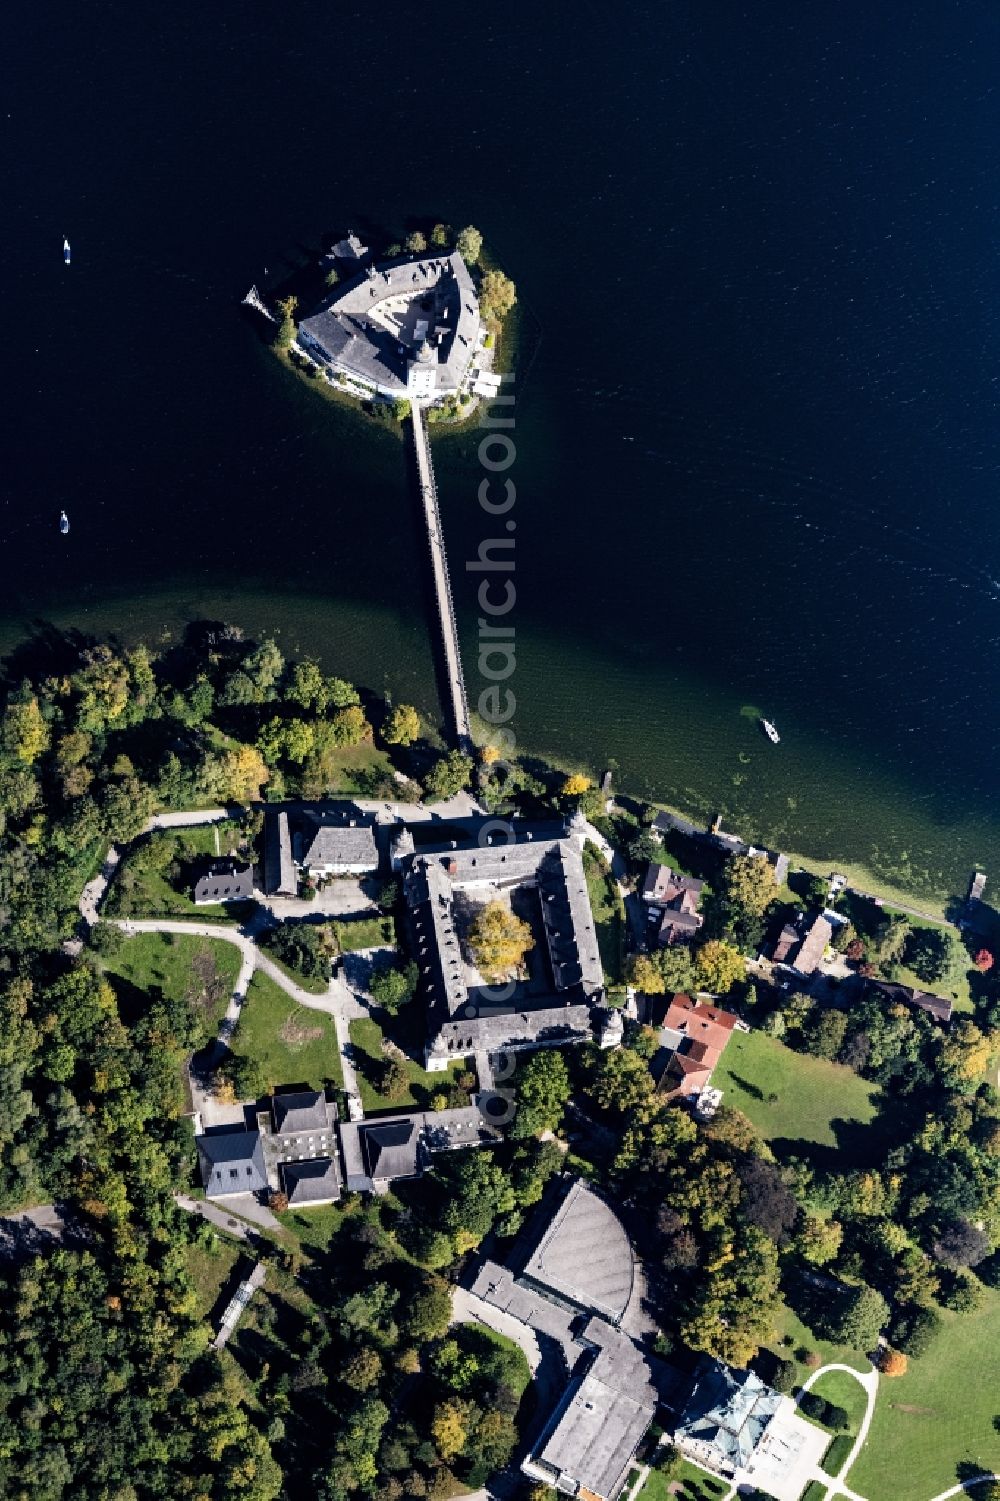 Aerial photograph Gmunden - Building and castle park systems of water castle Seeschloss Orth on lake Traunsee in Gmunden in Oberoesterreich, Austria